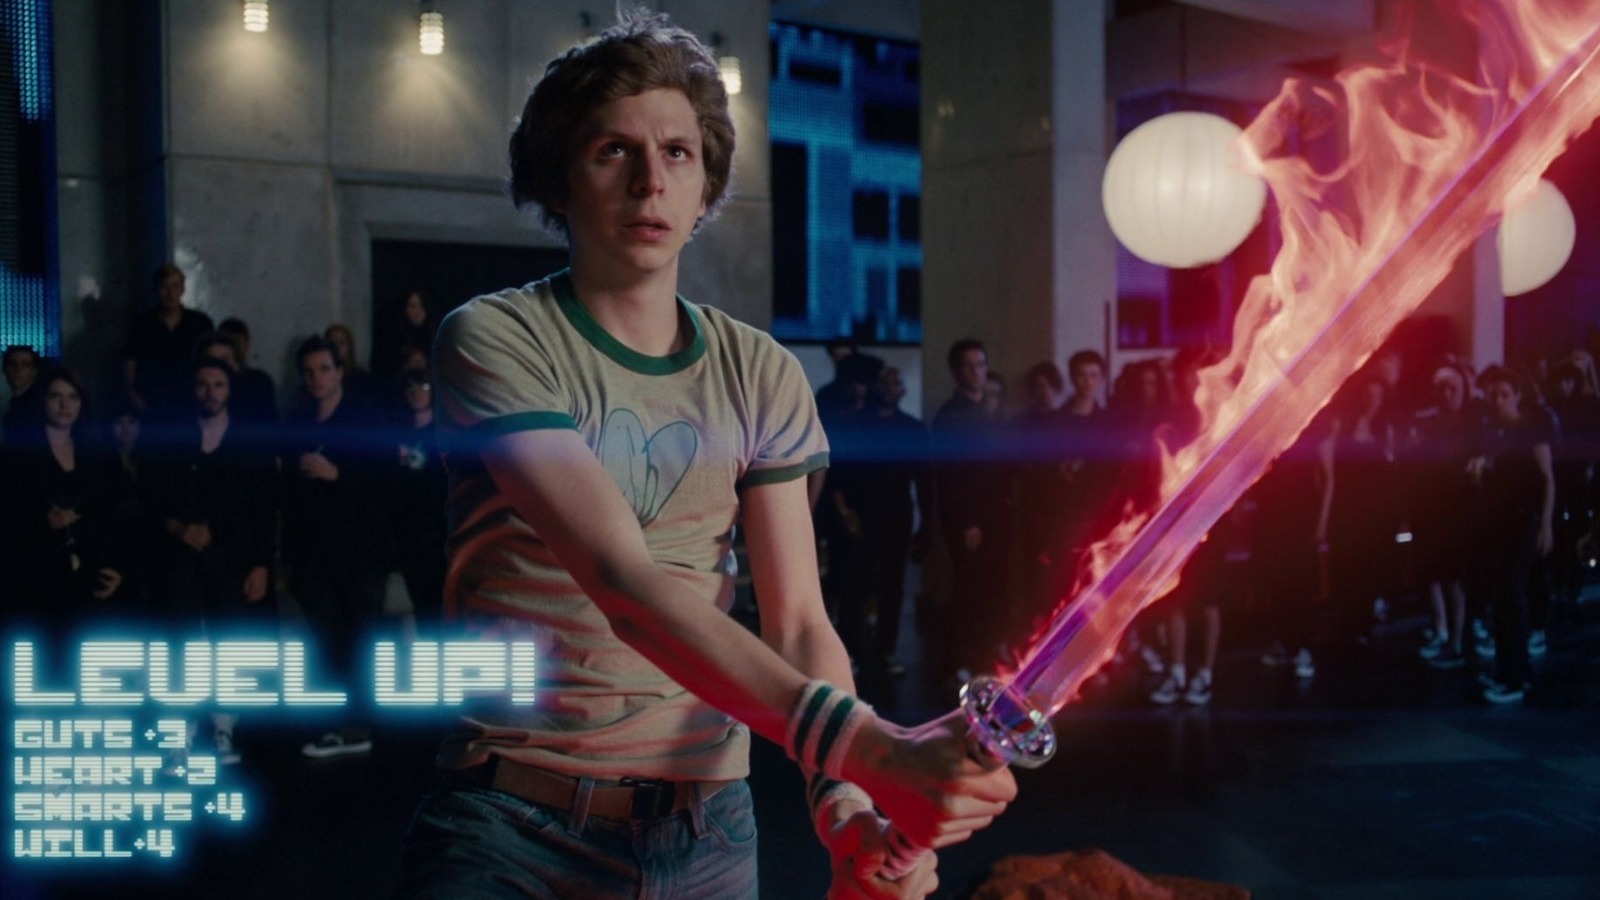 Edgar Wright announces Scott Pilgrim anime - and the whole cast is  returning - SciFiNow